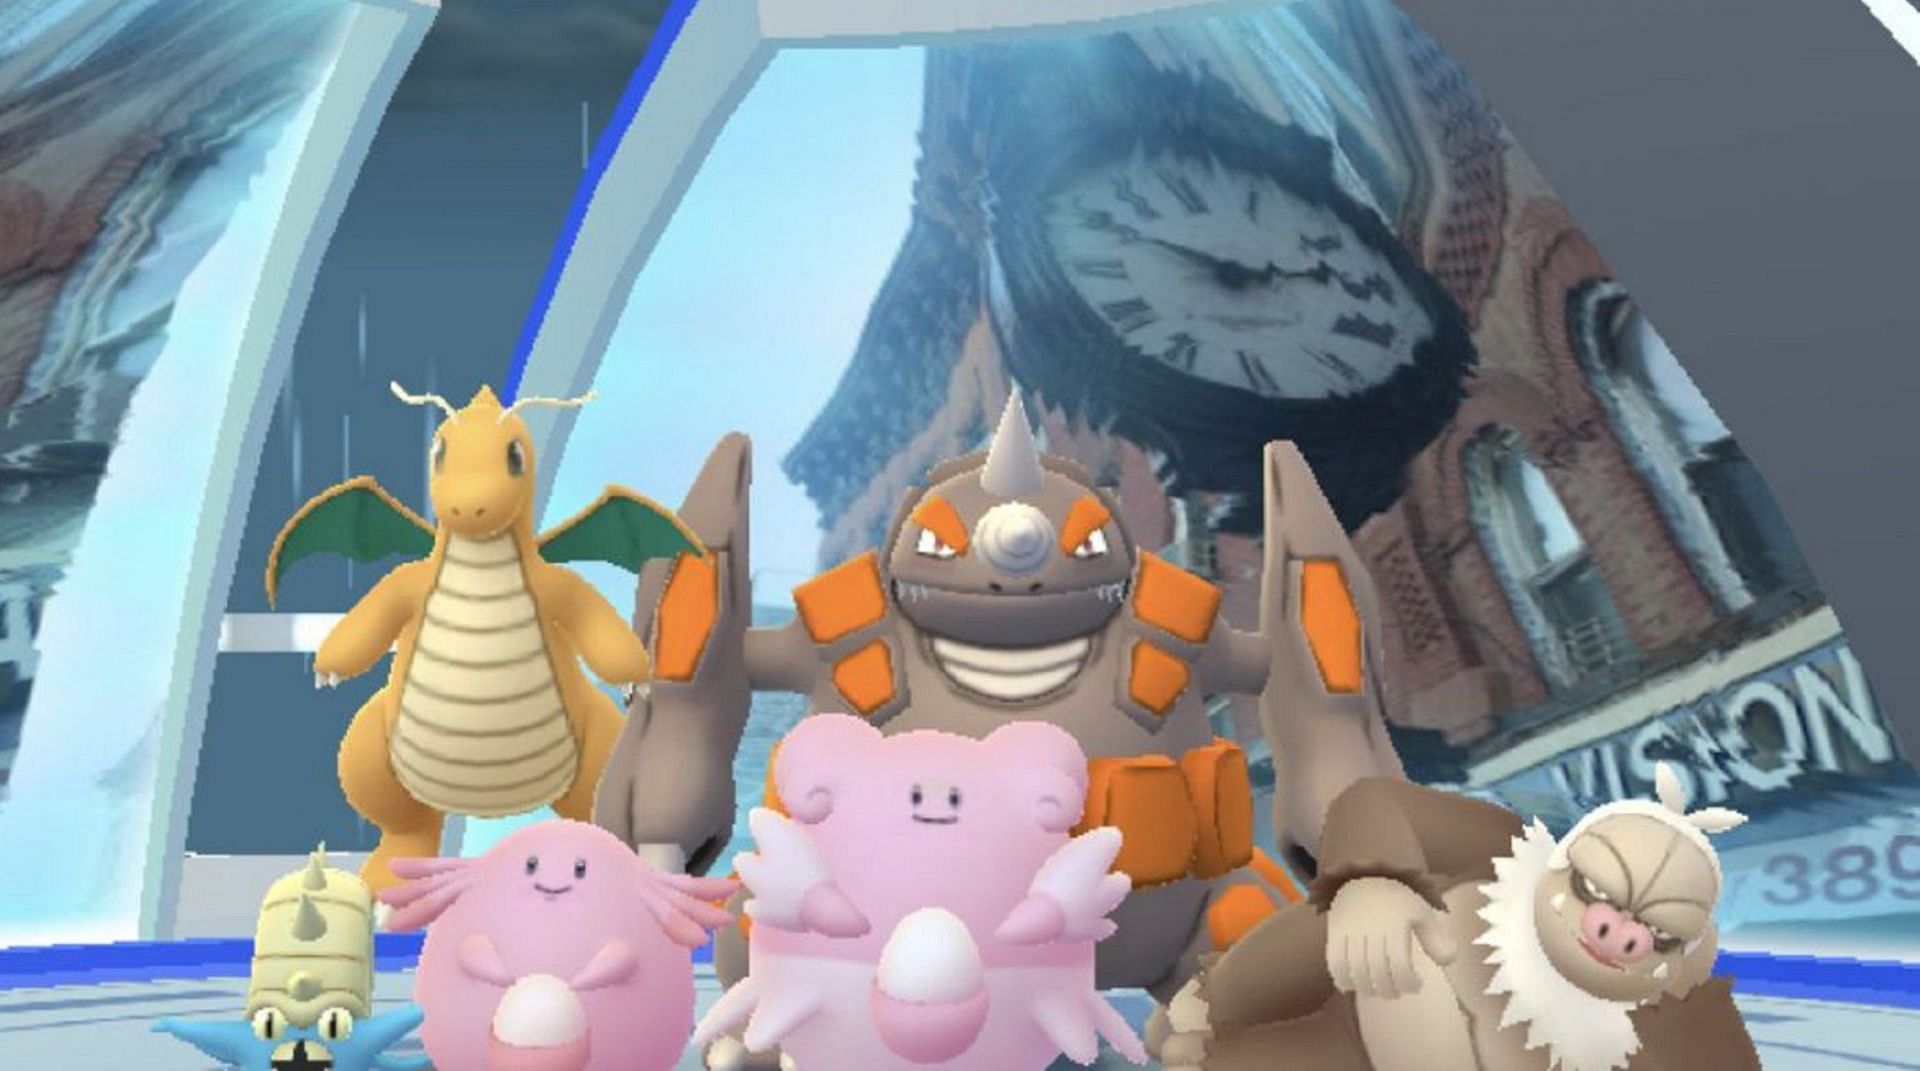 Rhyperior&#039;s size discrepancy was eventually addressed by a Pokemon GO patch (Image via Niantic)